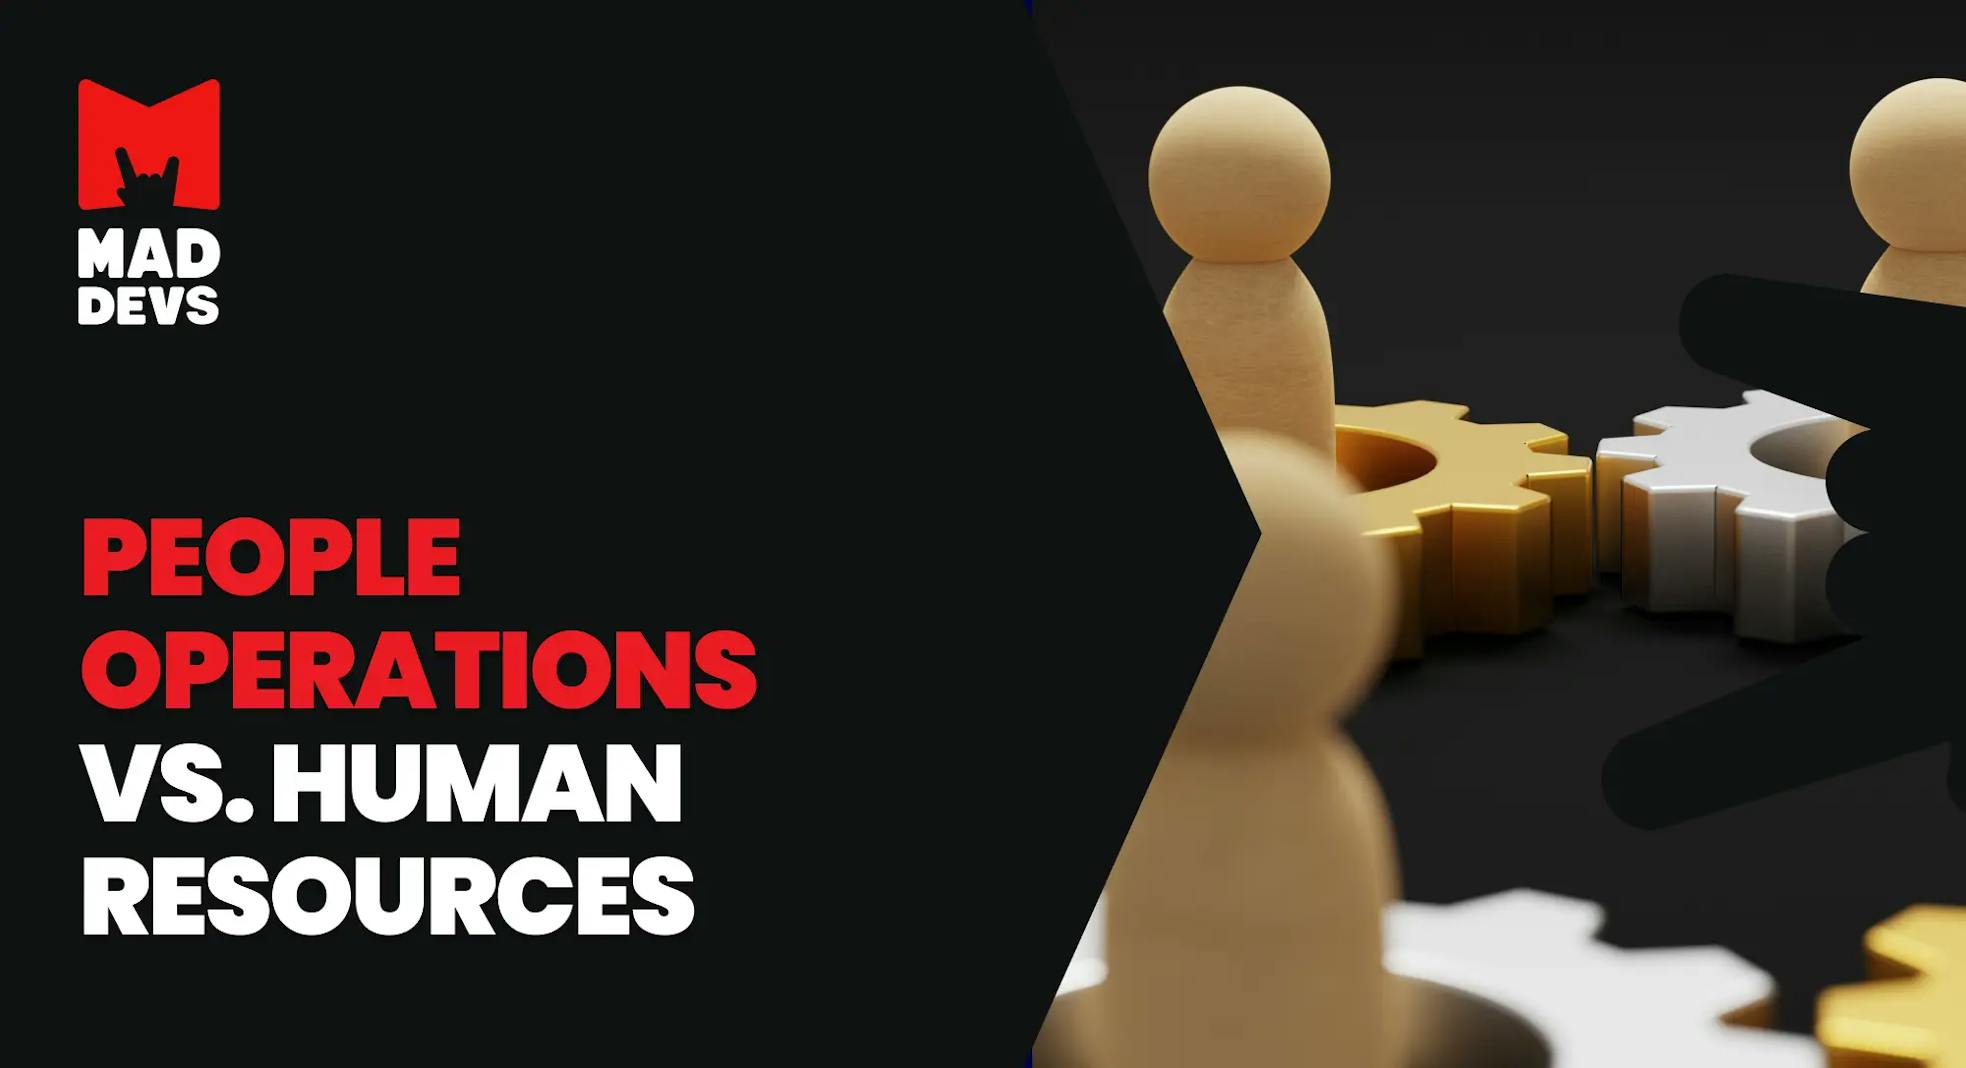 People Operations and Human Resources: What's the Difference?